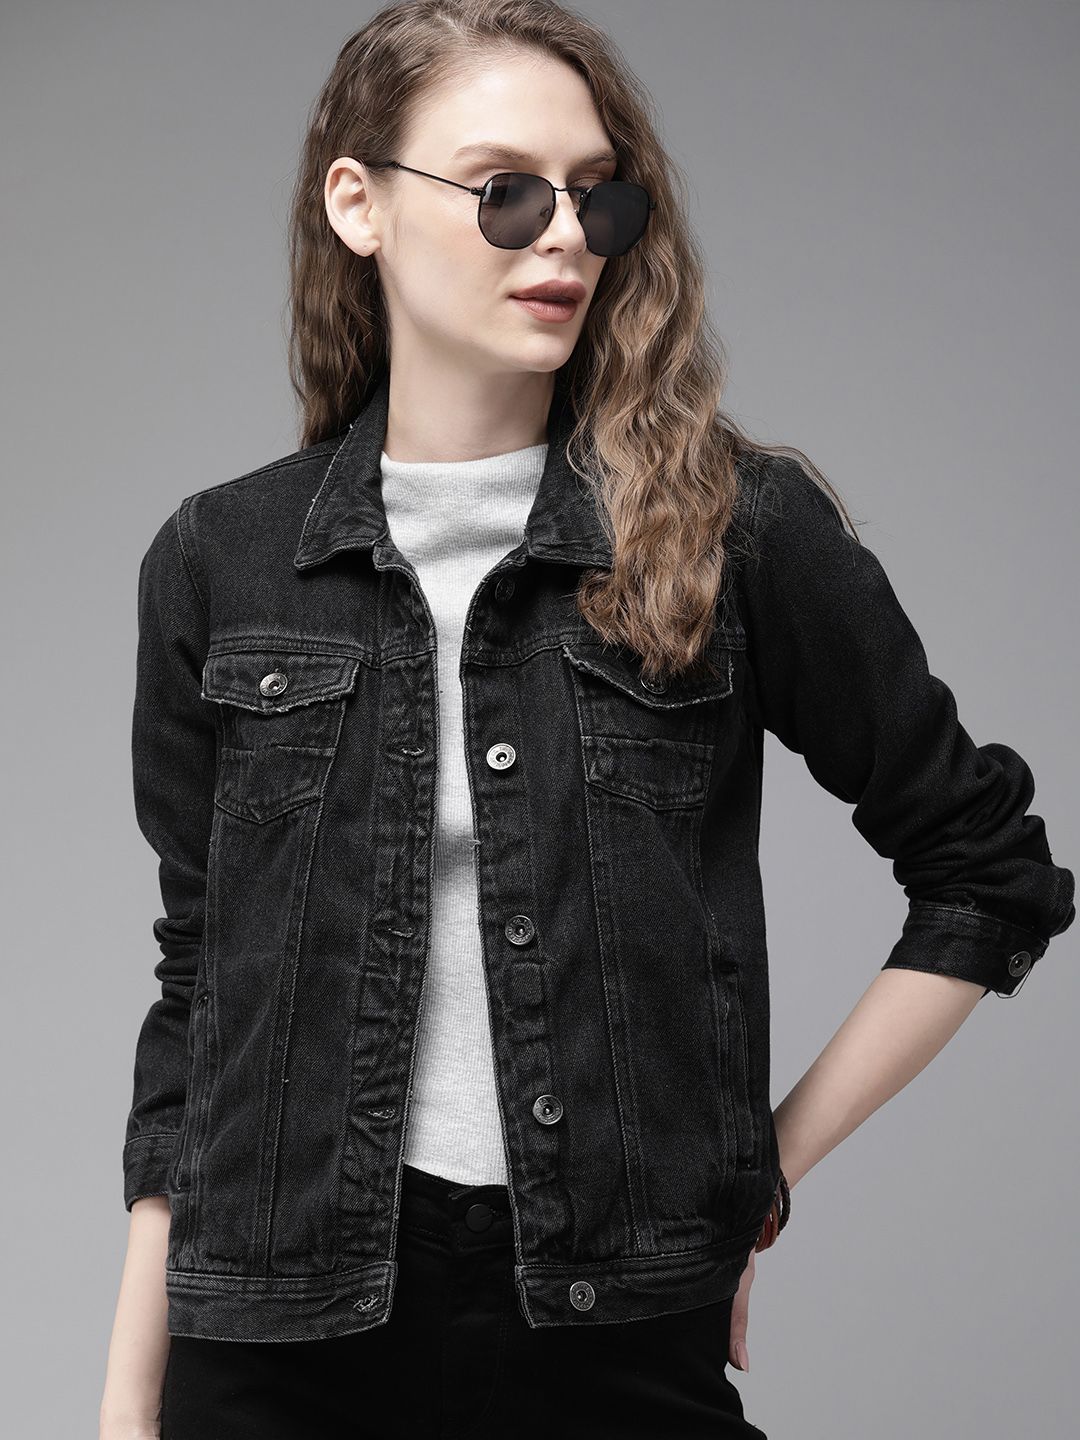 The Roadster Lifestyle Co Women Black Solid Denim Jacket Price in India